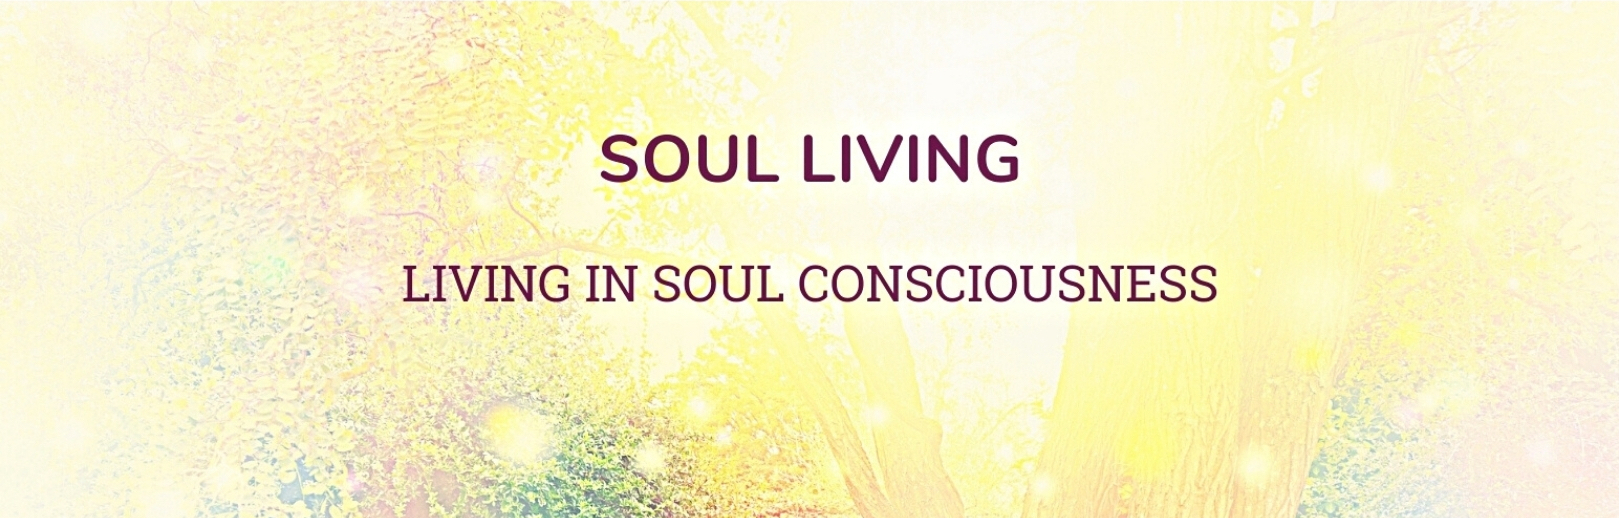 6.  Soul Living: Intro Goes Here